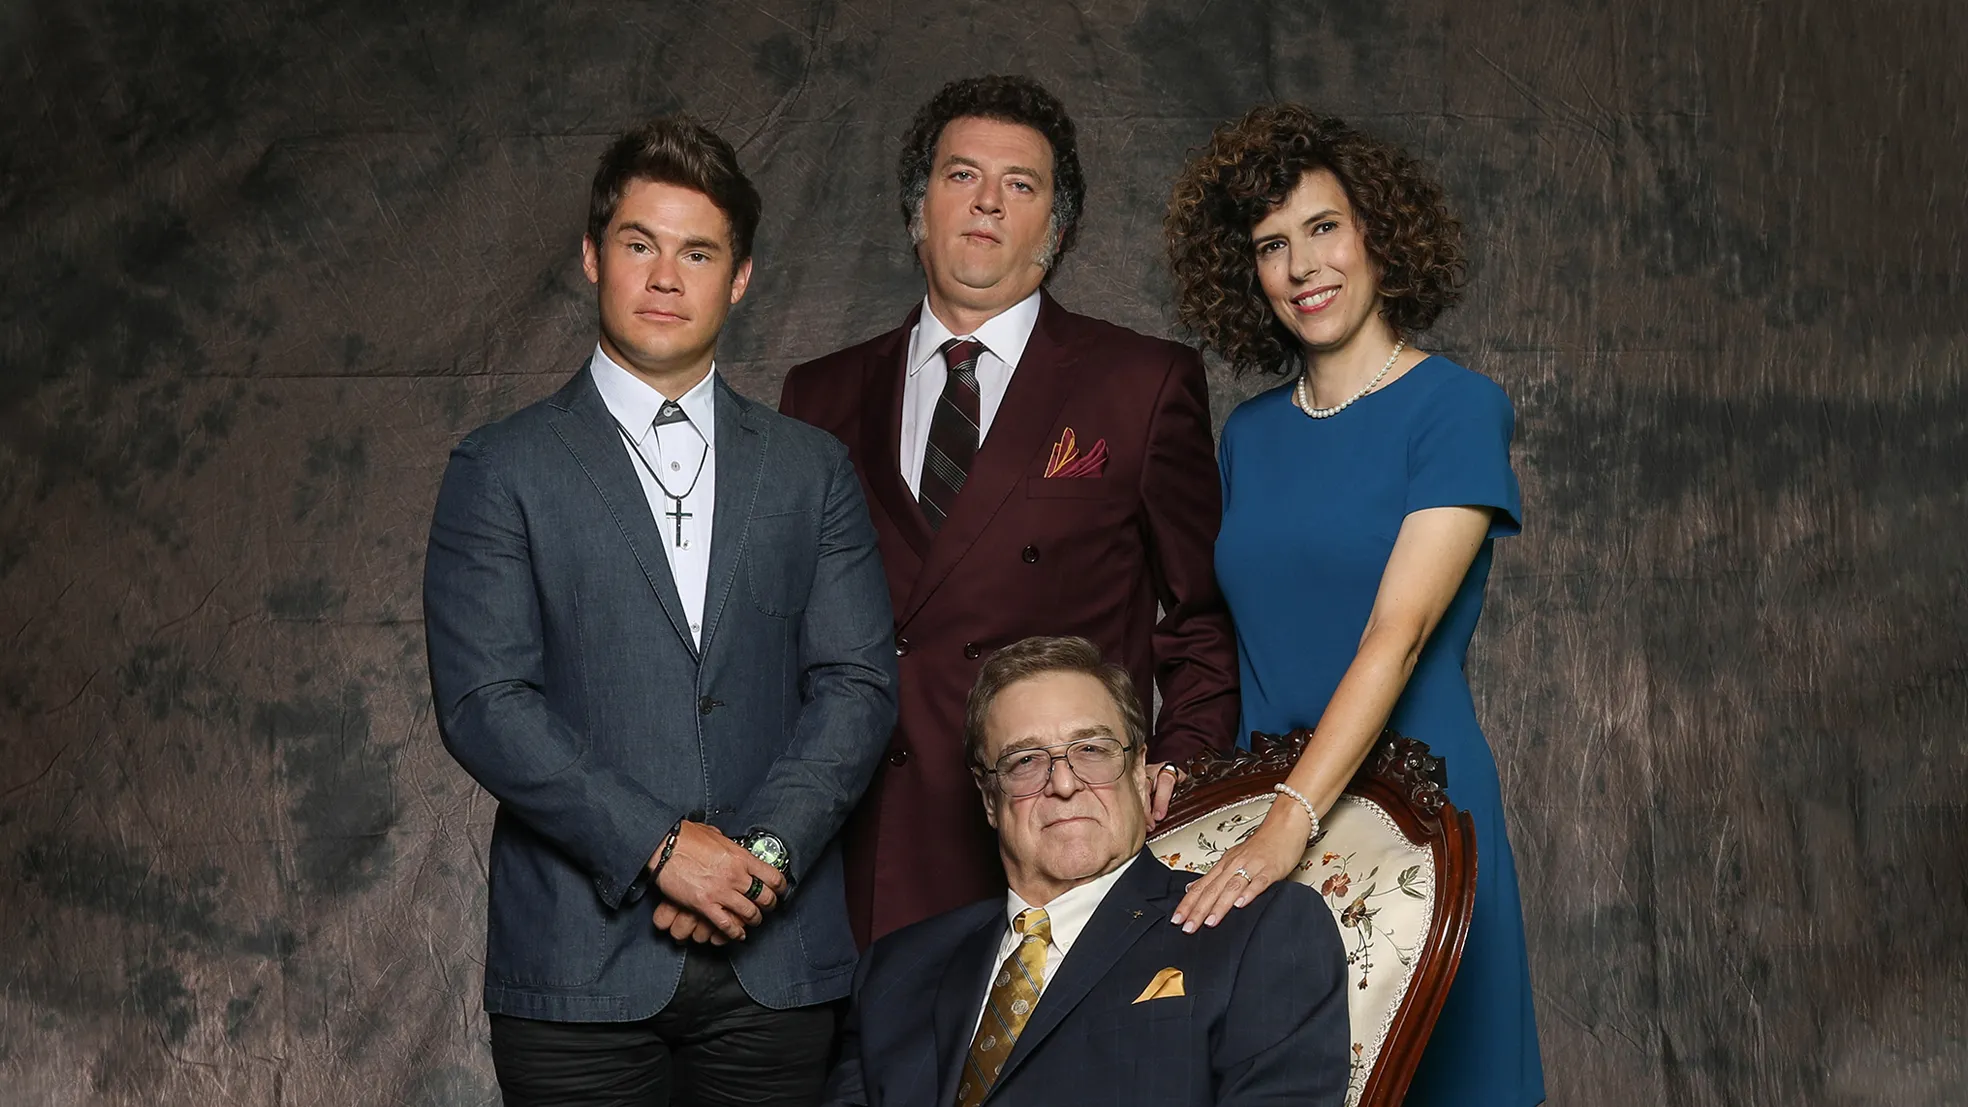 HBO Renews Original Comedy Series "The Righteous Gemstones" for a Fourth Season